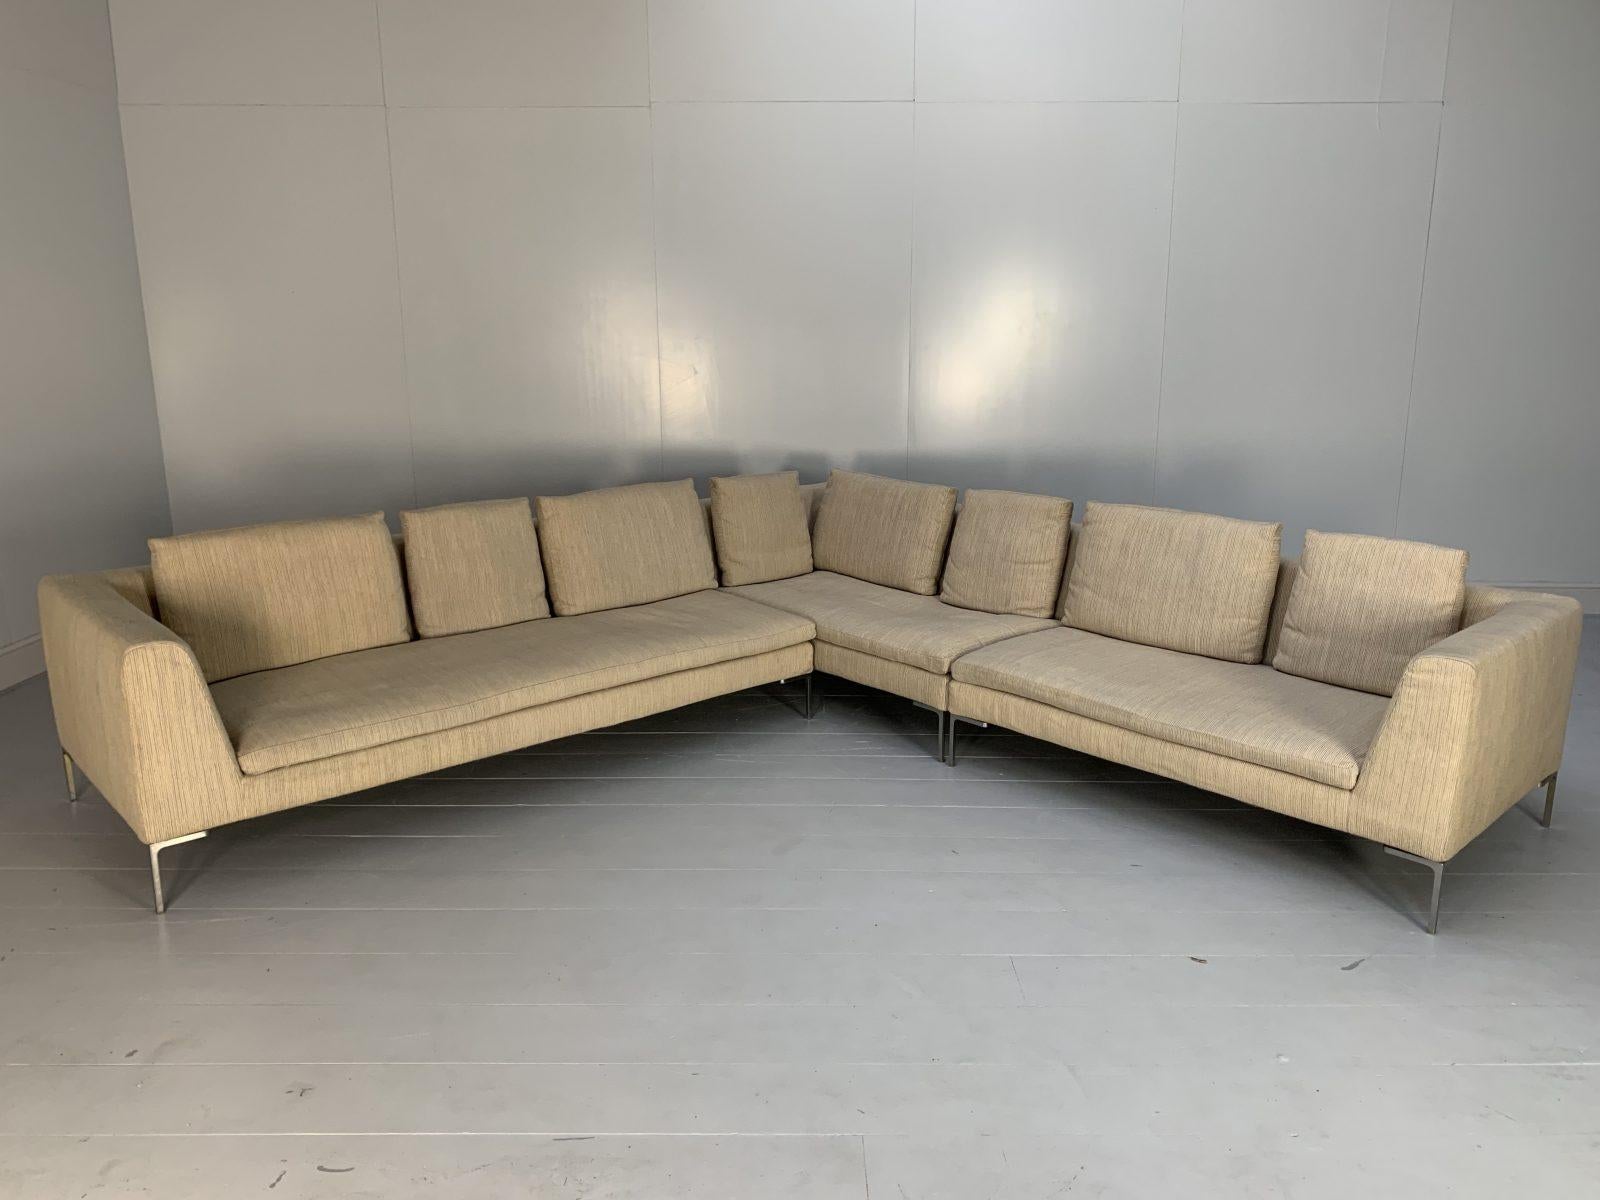 This is a huge, iconic “Charles” 3-Section L-Shape Sofa (consisting of a CH228S, a CH156S and a CH156D section) from the “Maxalto” range of seating from the world renown Italian furniture house of B&B Italia.

In a world of temporary pleasures,